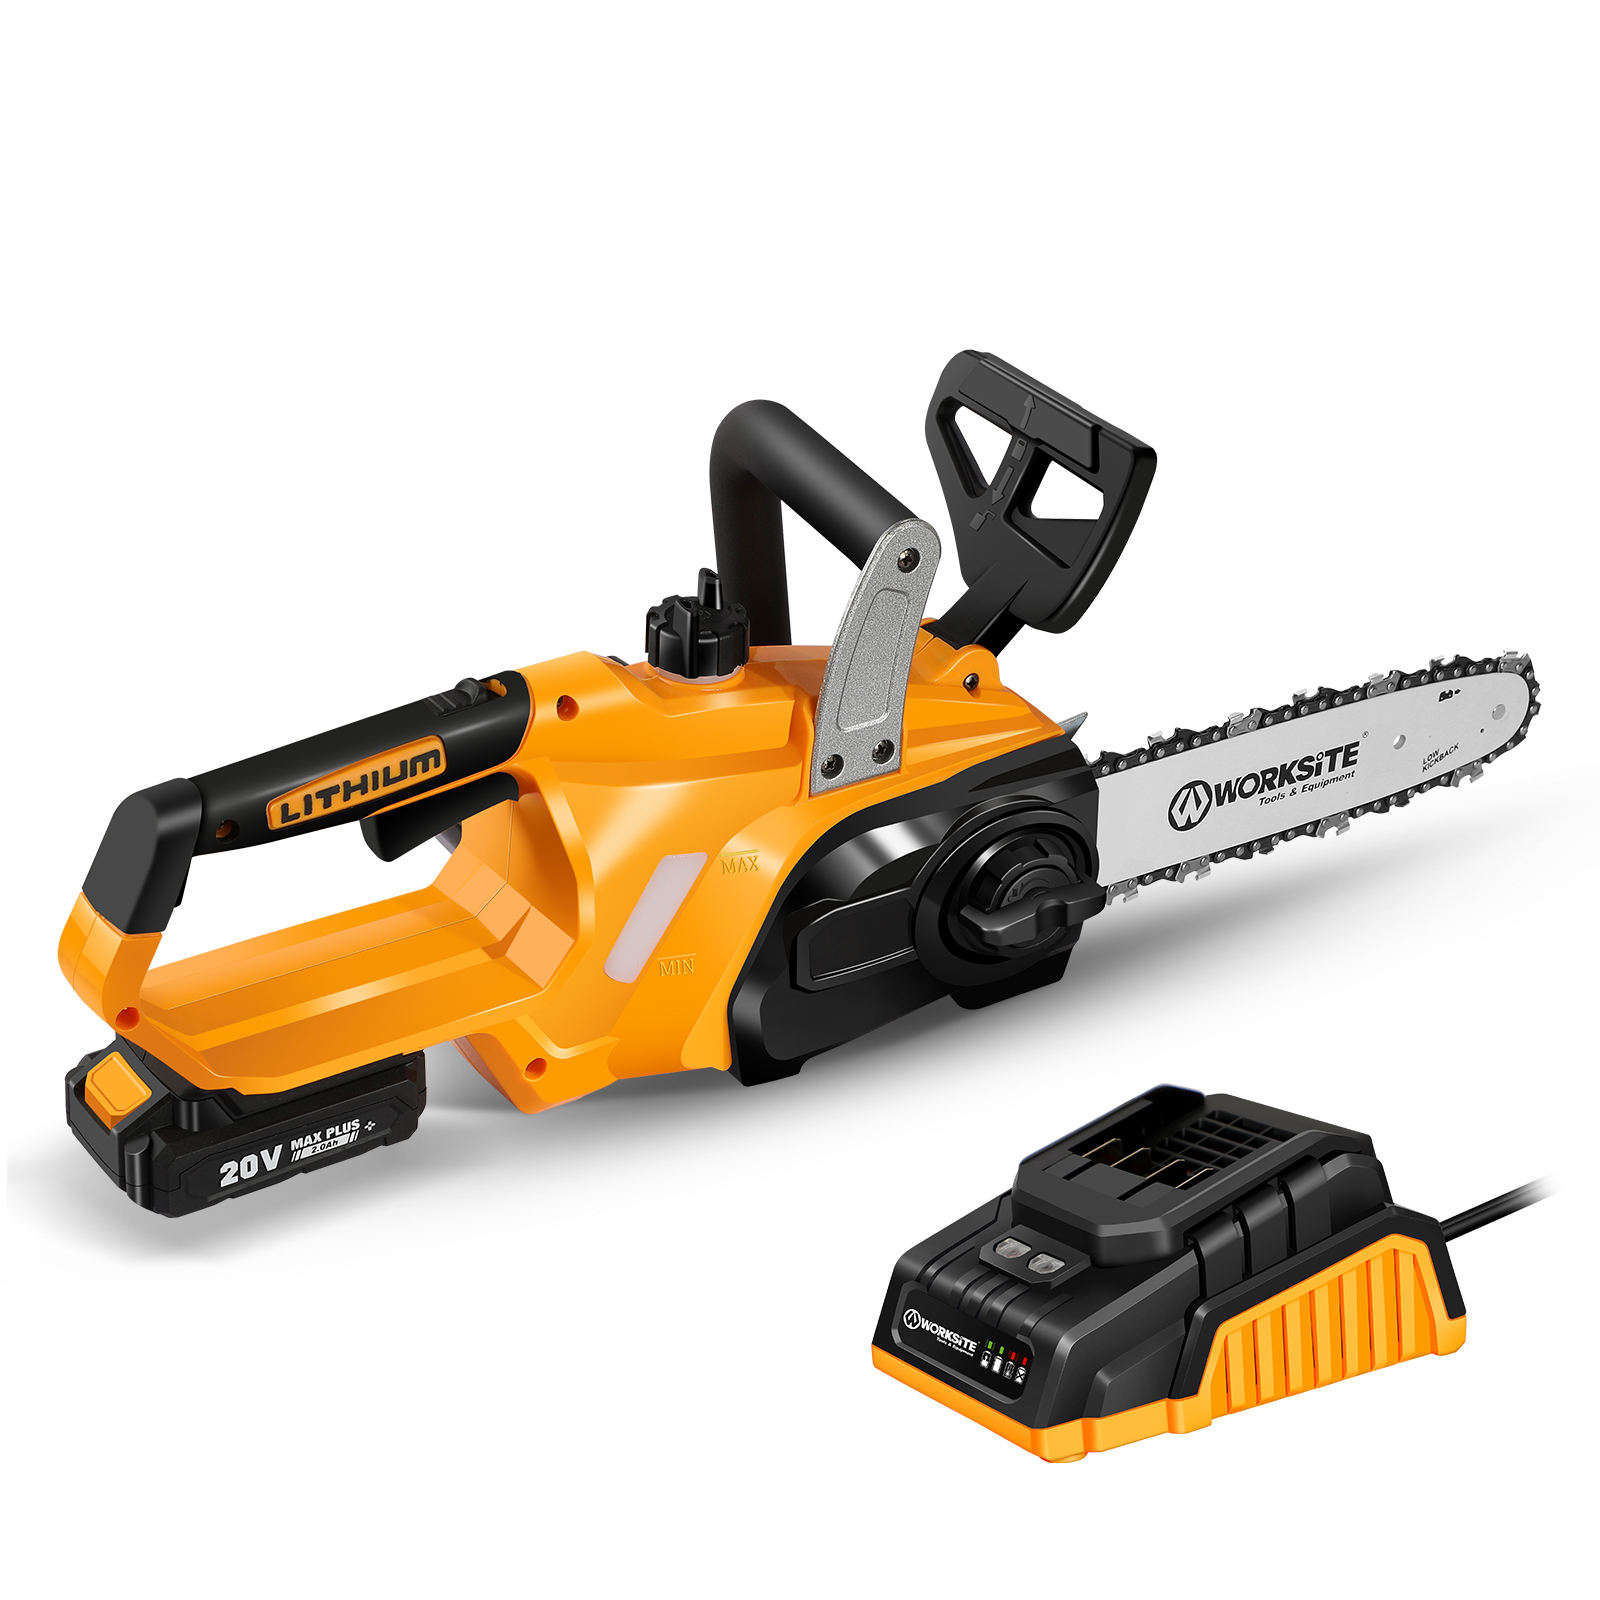 WORKSITE 10" 20V MAX Li-Ion Cordless Chainsaw w/ 2.0 Ah Battery & Fast Charger, $79.99 + Free shipping